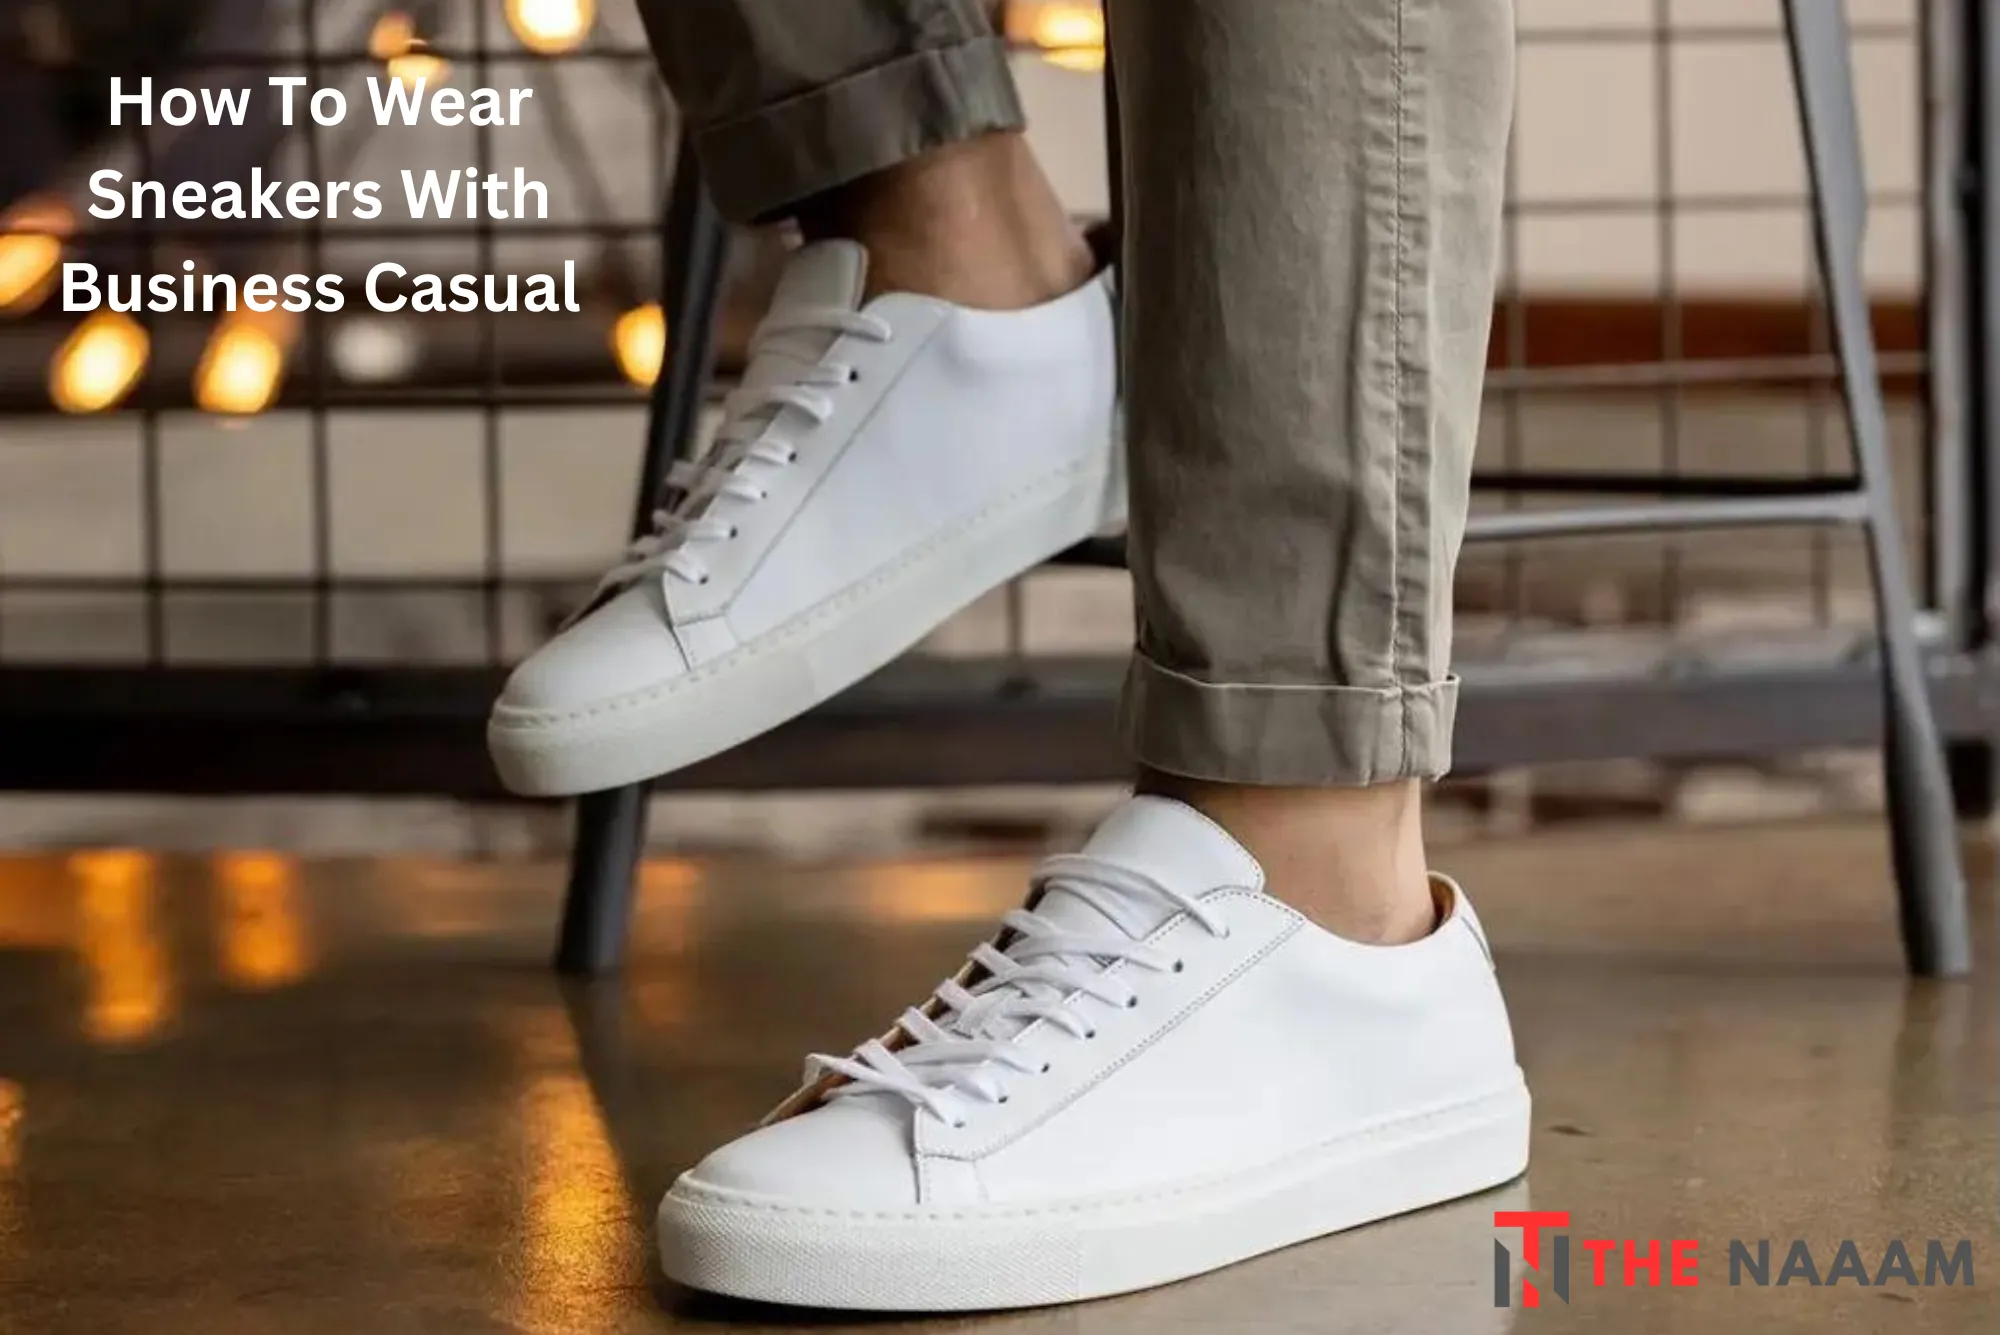 How To Wear Sneakers With Business Casual